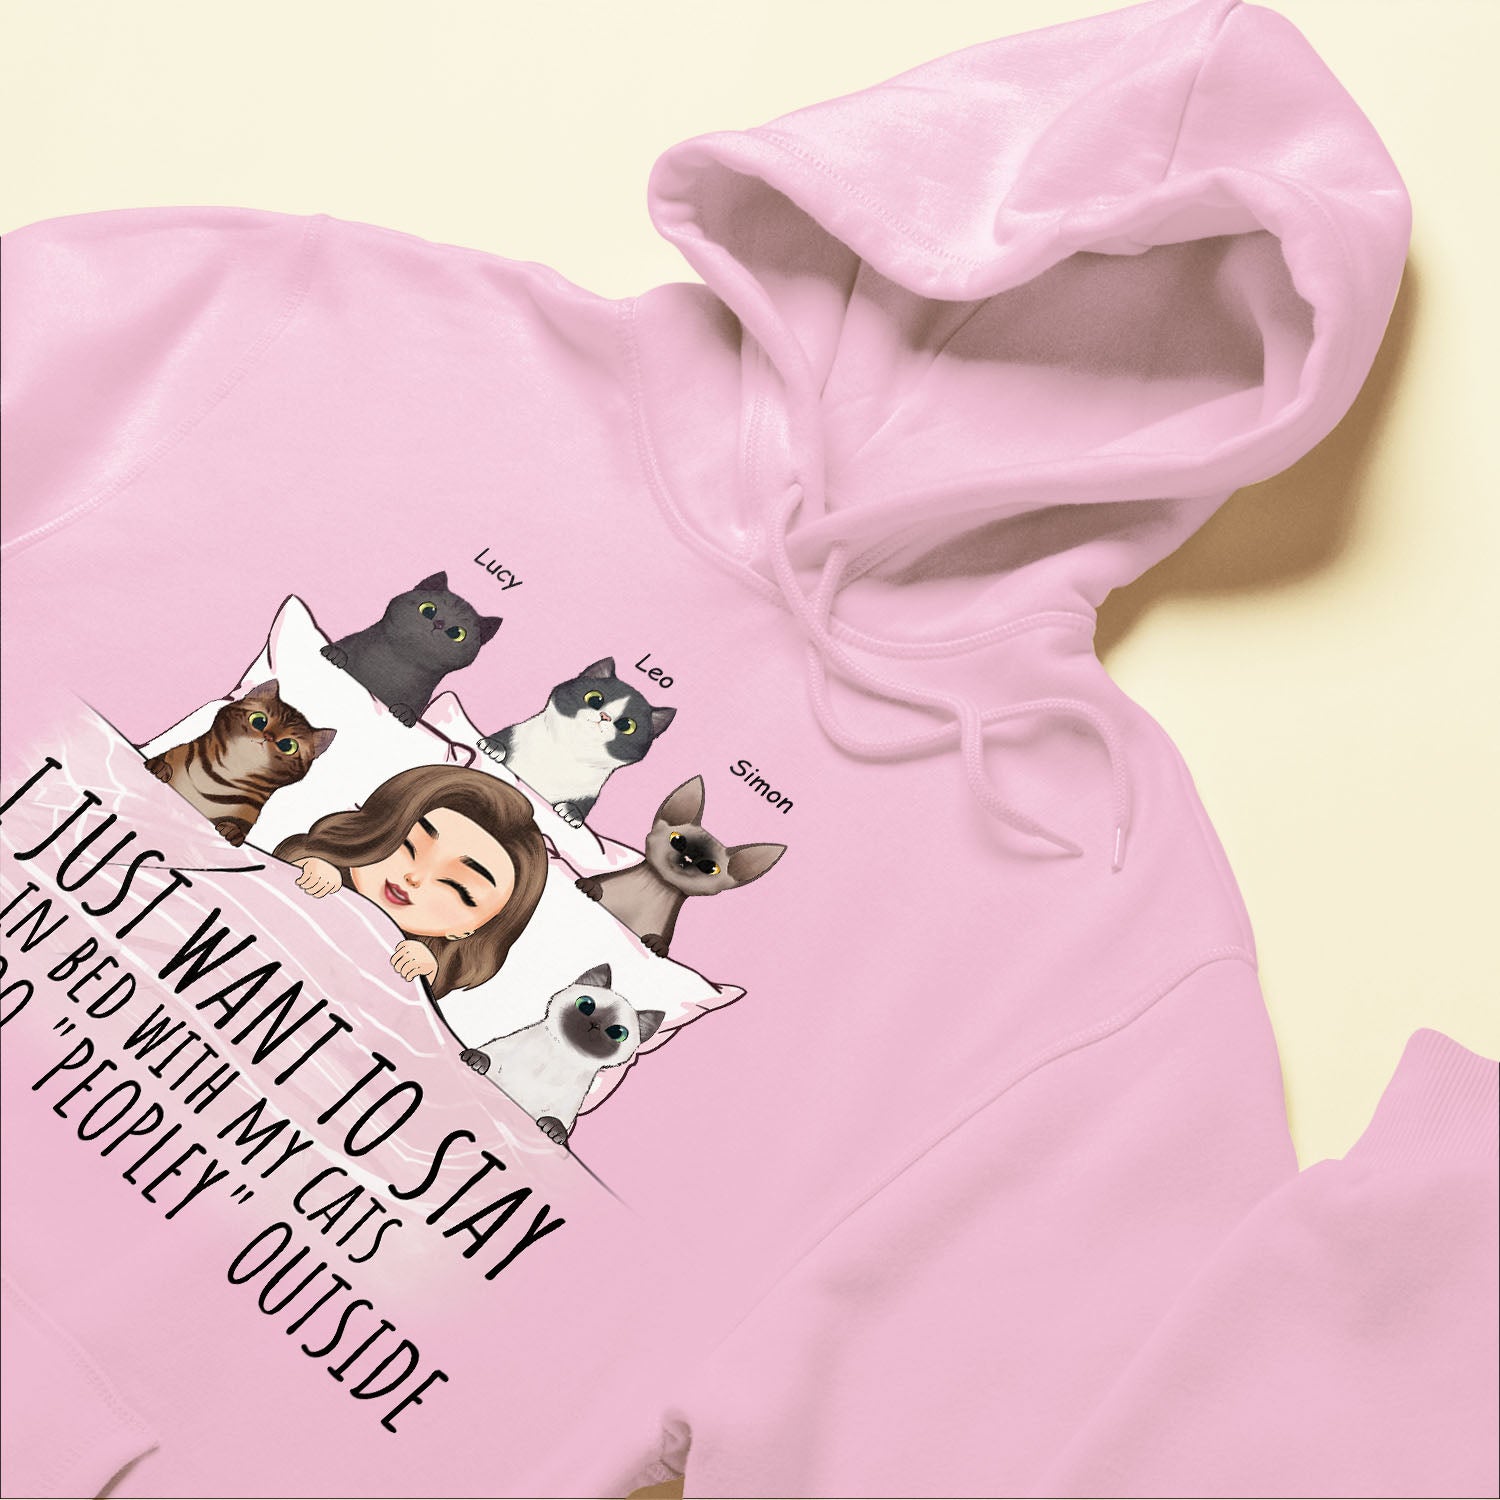 Stay In Bed With My Cats - Personalized Shirt - Birthday Gift For Cat Lover